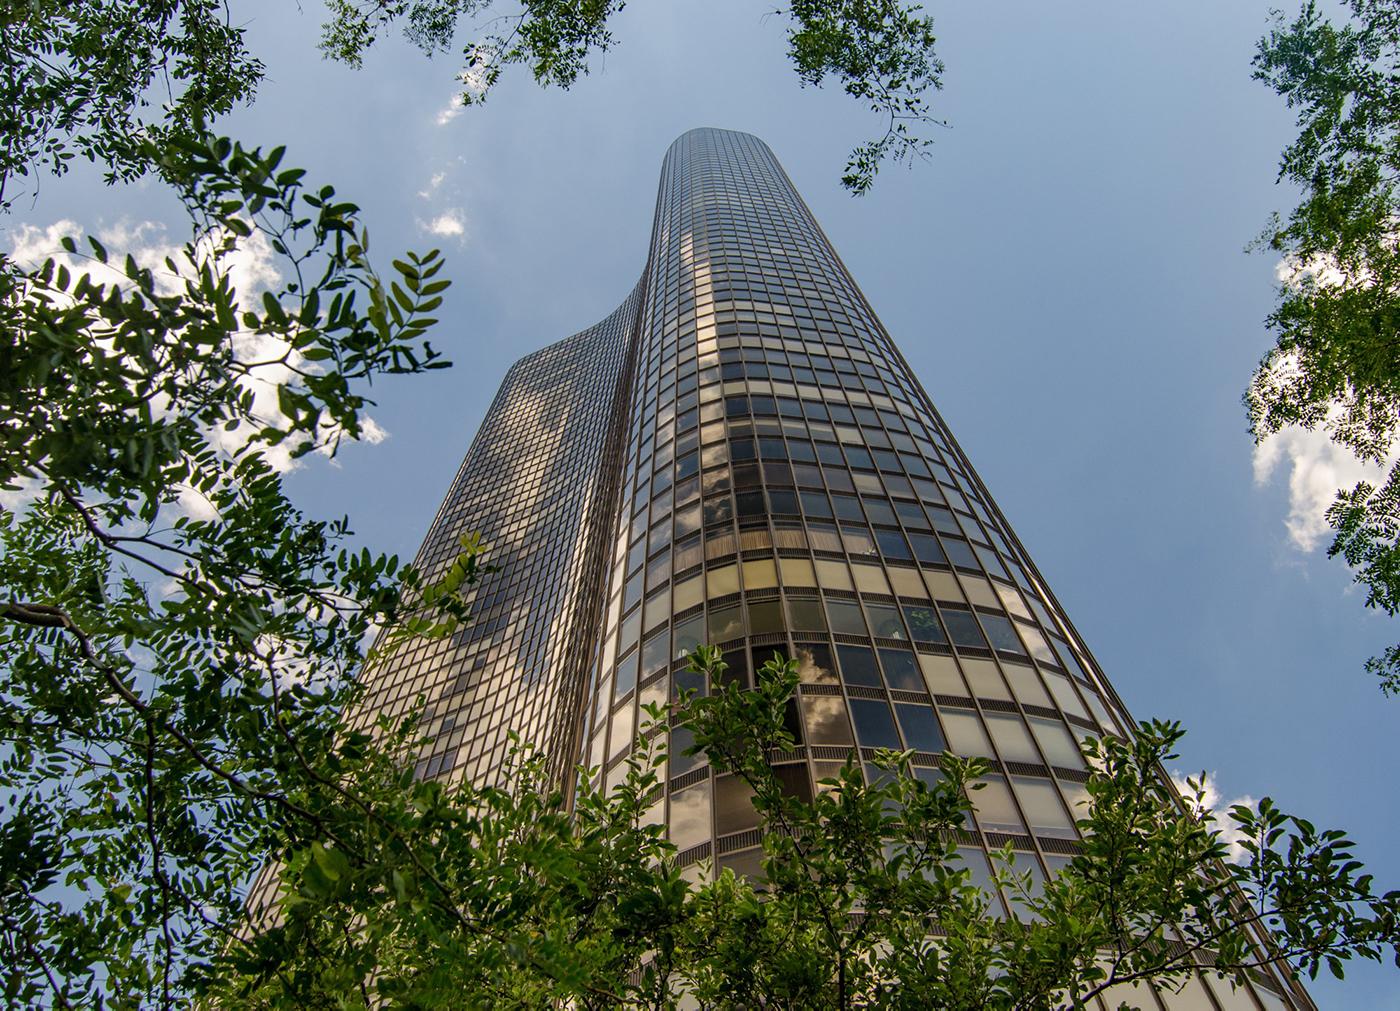 Lake Point Tower in Chicago. Photo: Eric Allix Rogers